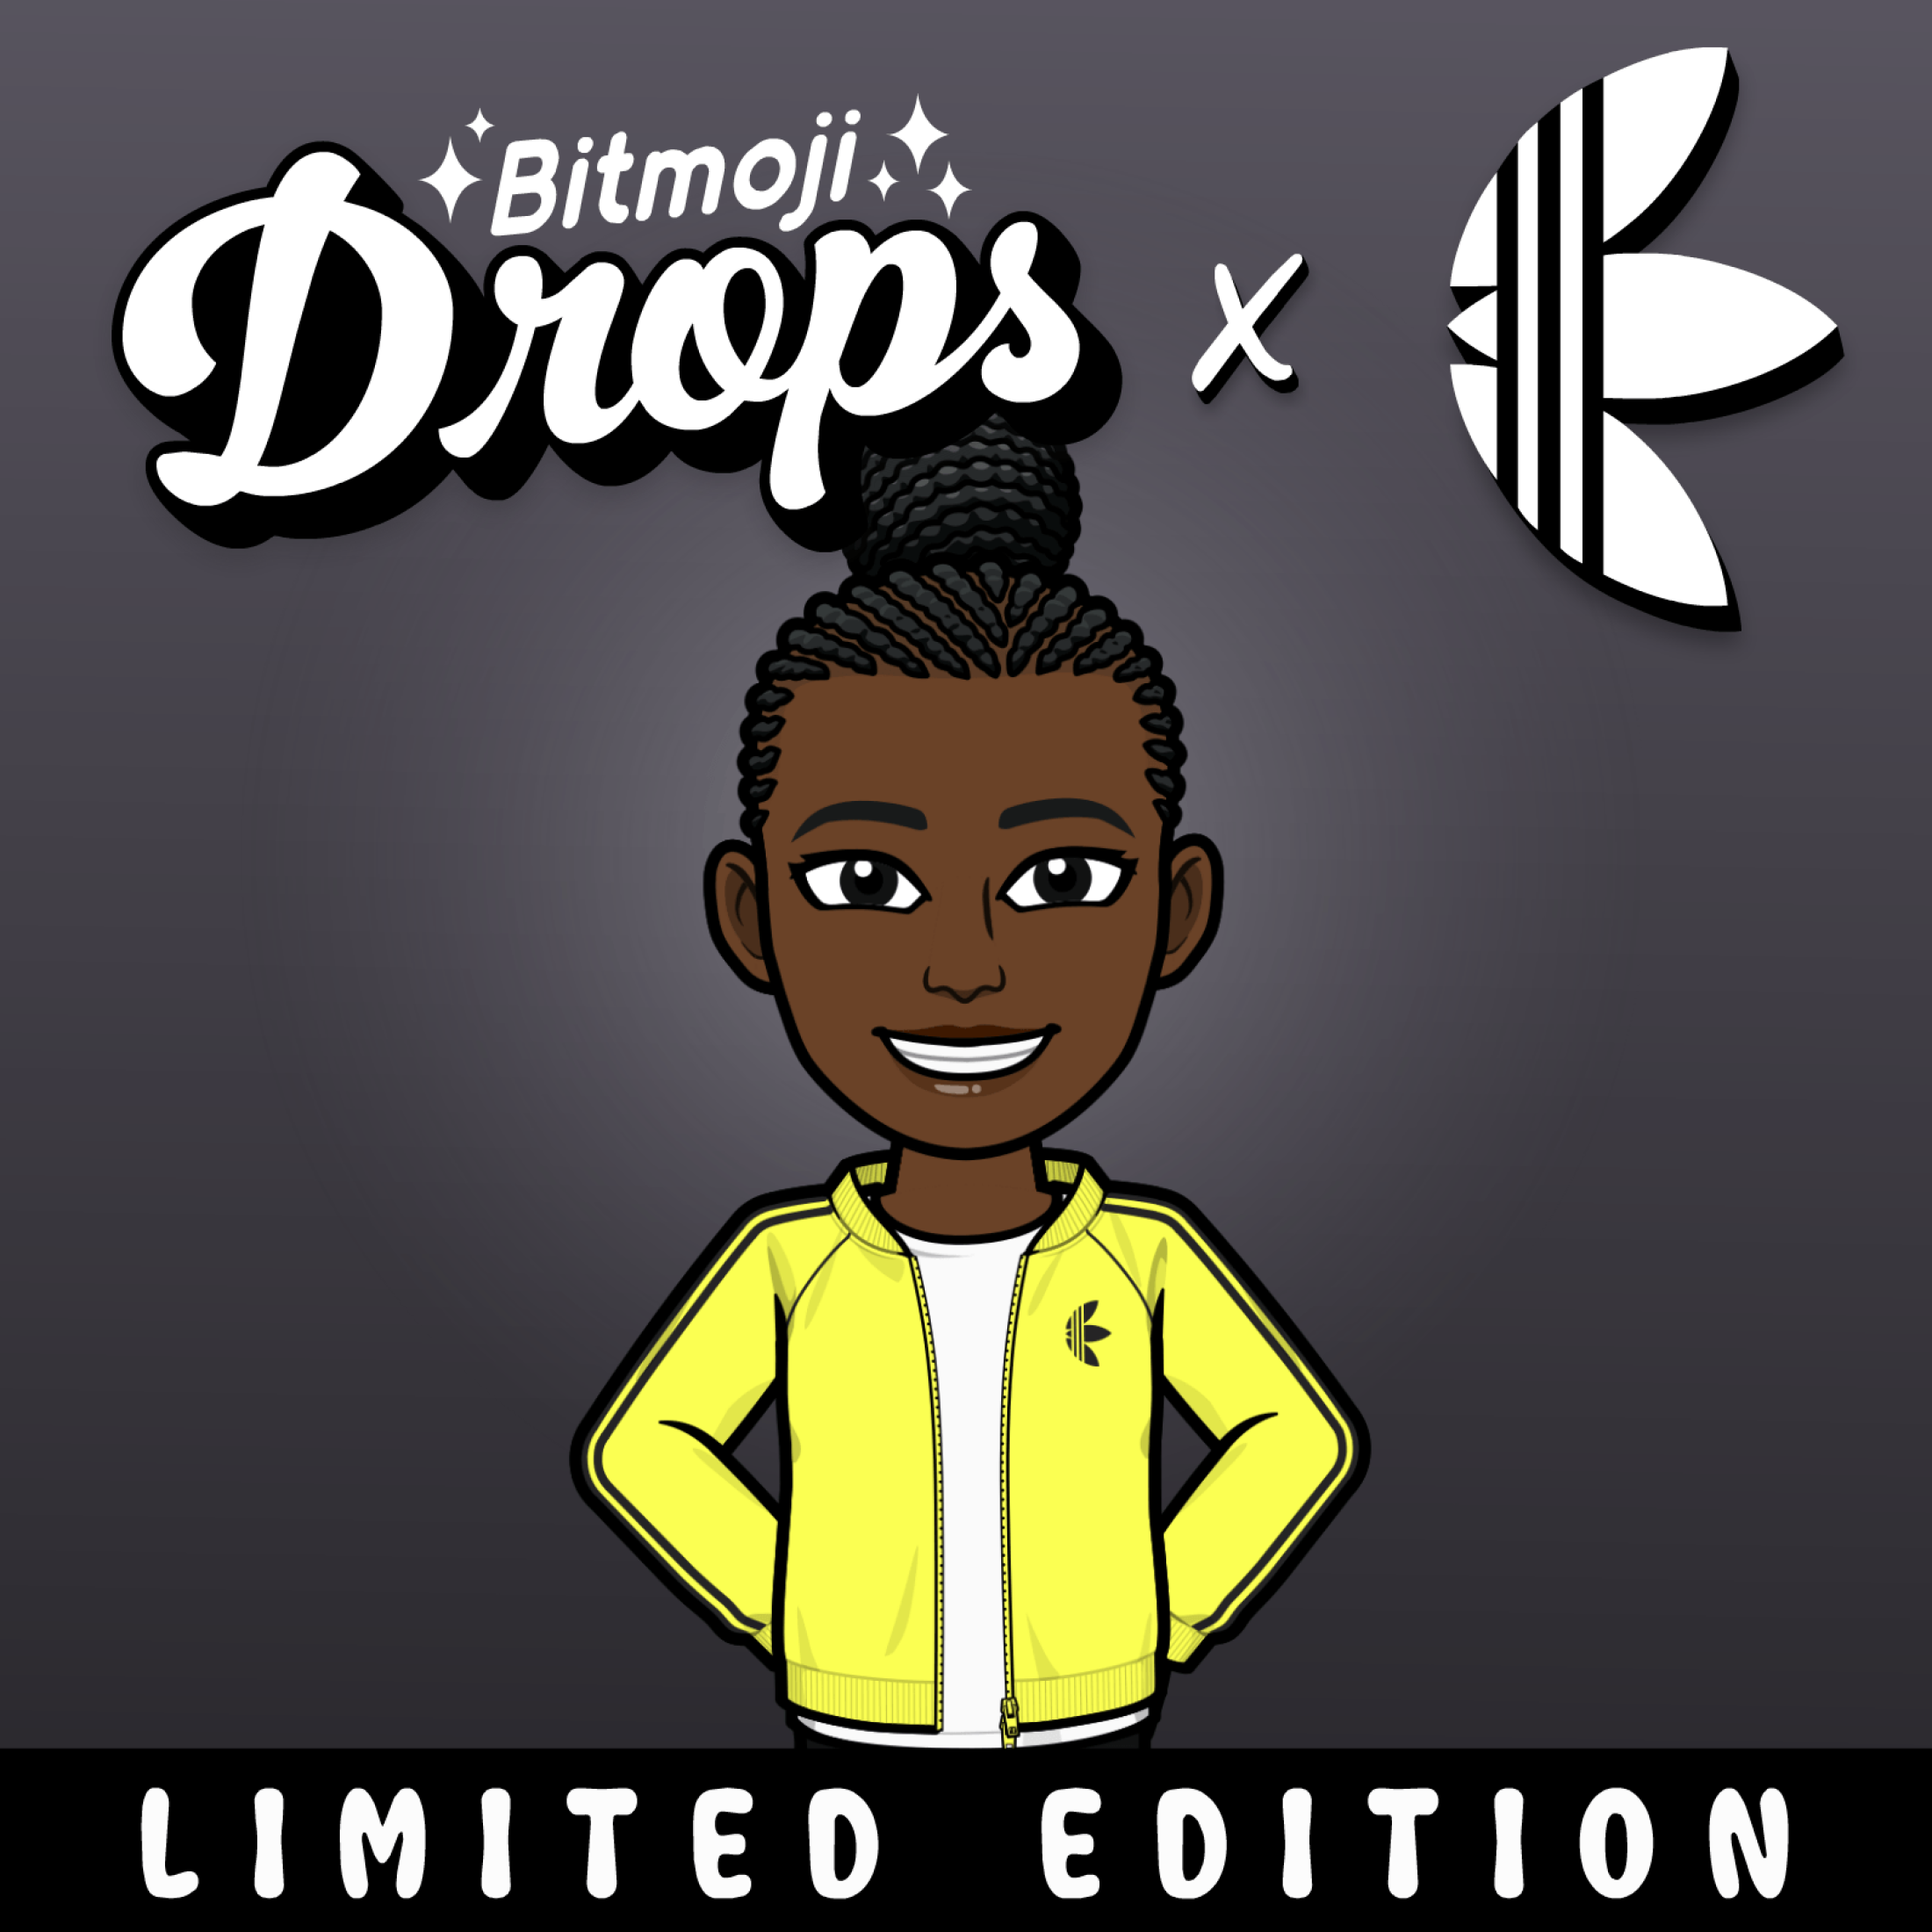 Snapchat’s most up-to-date Bitmoji Tumble recommendations irregular Adidas merch, nevertheless there’s a trace trace thumbnail